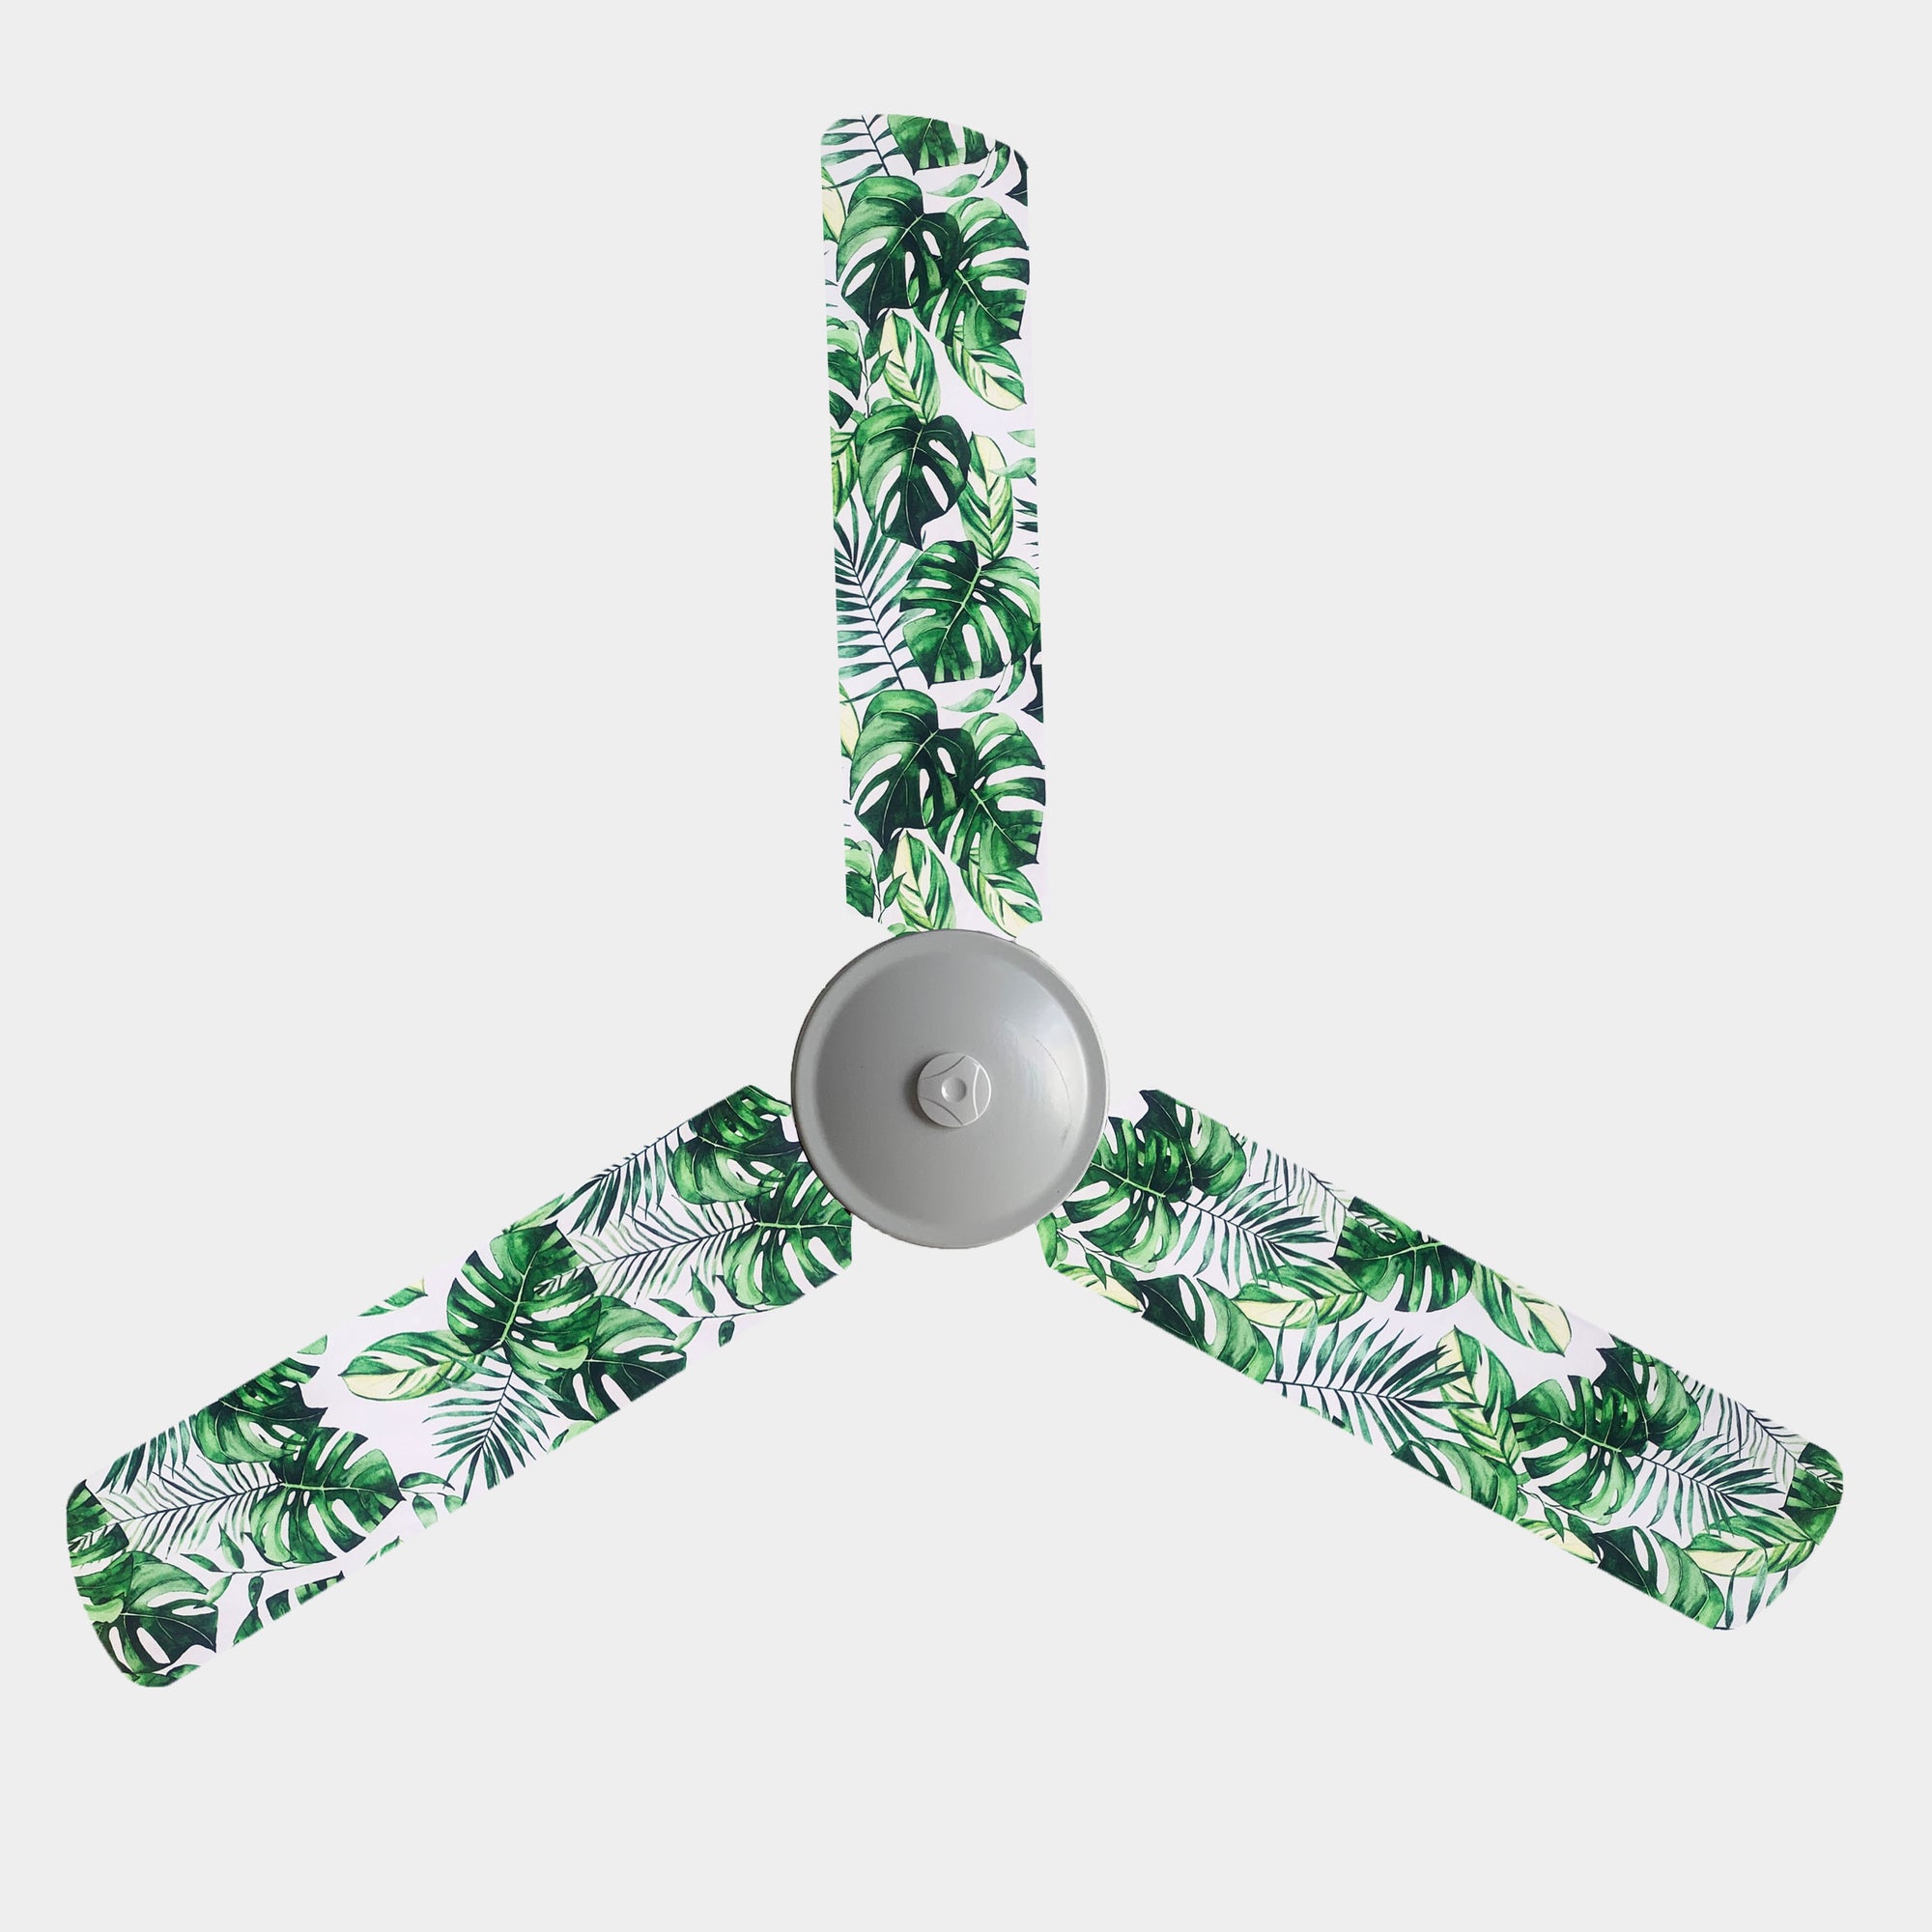 Green monstera leaves and green fern print fanblade covers on a white background